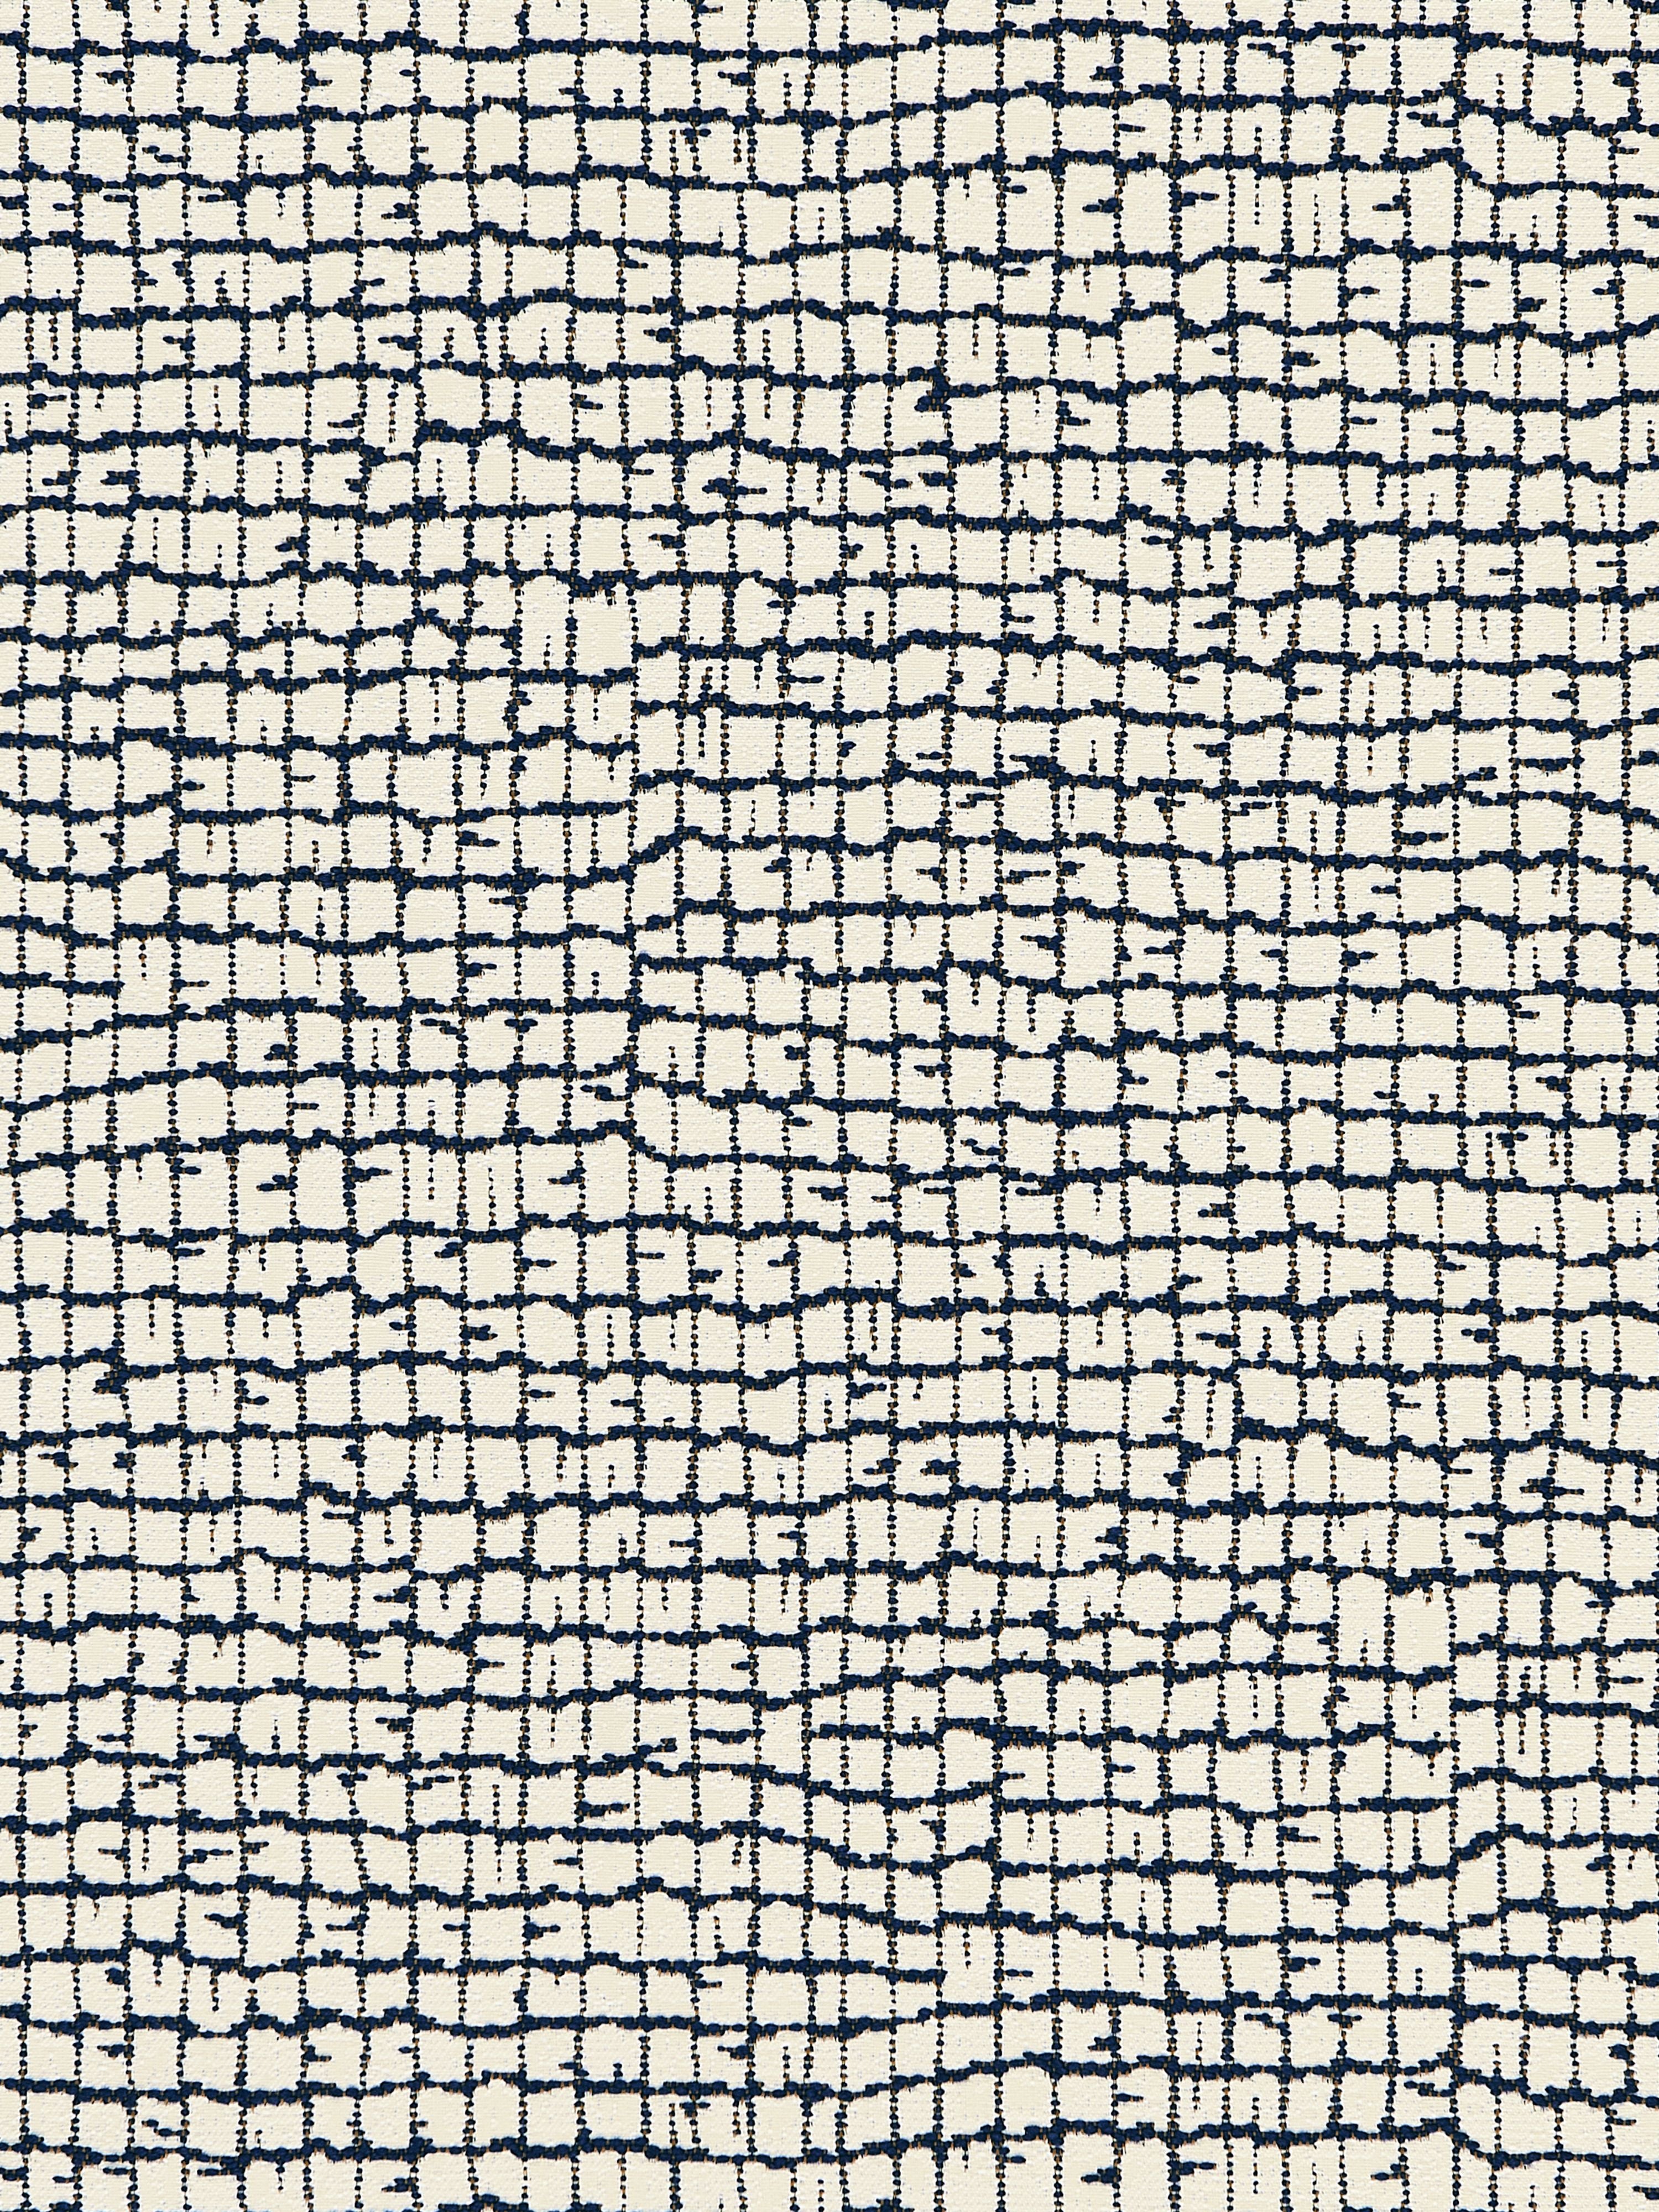 Troya Beach fabric in navy color - pattern number PO 0004TROY - by Scalamandre in the Old World Weavers collection